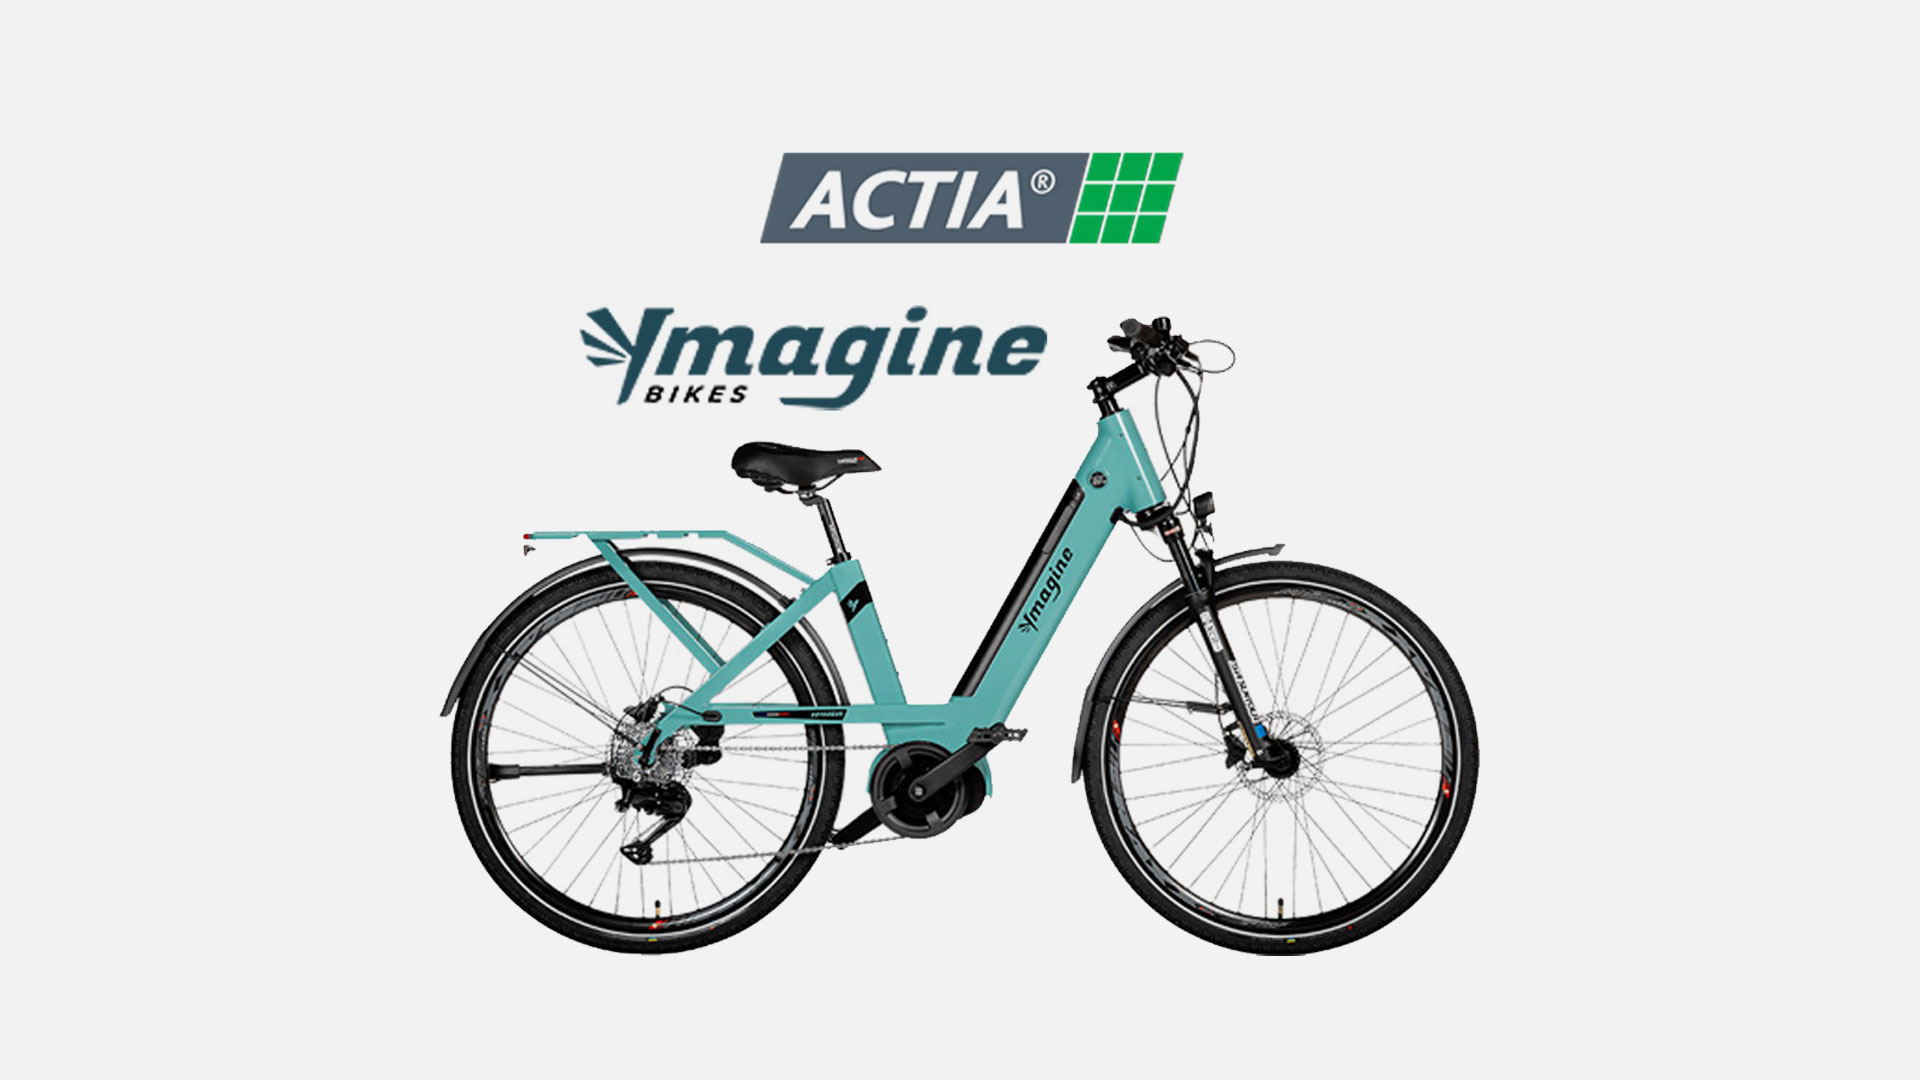 YMAGINE BIKES AND ACTIA: THE TECHNOLOGICAL ALLIANCE…